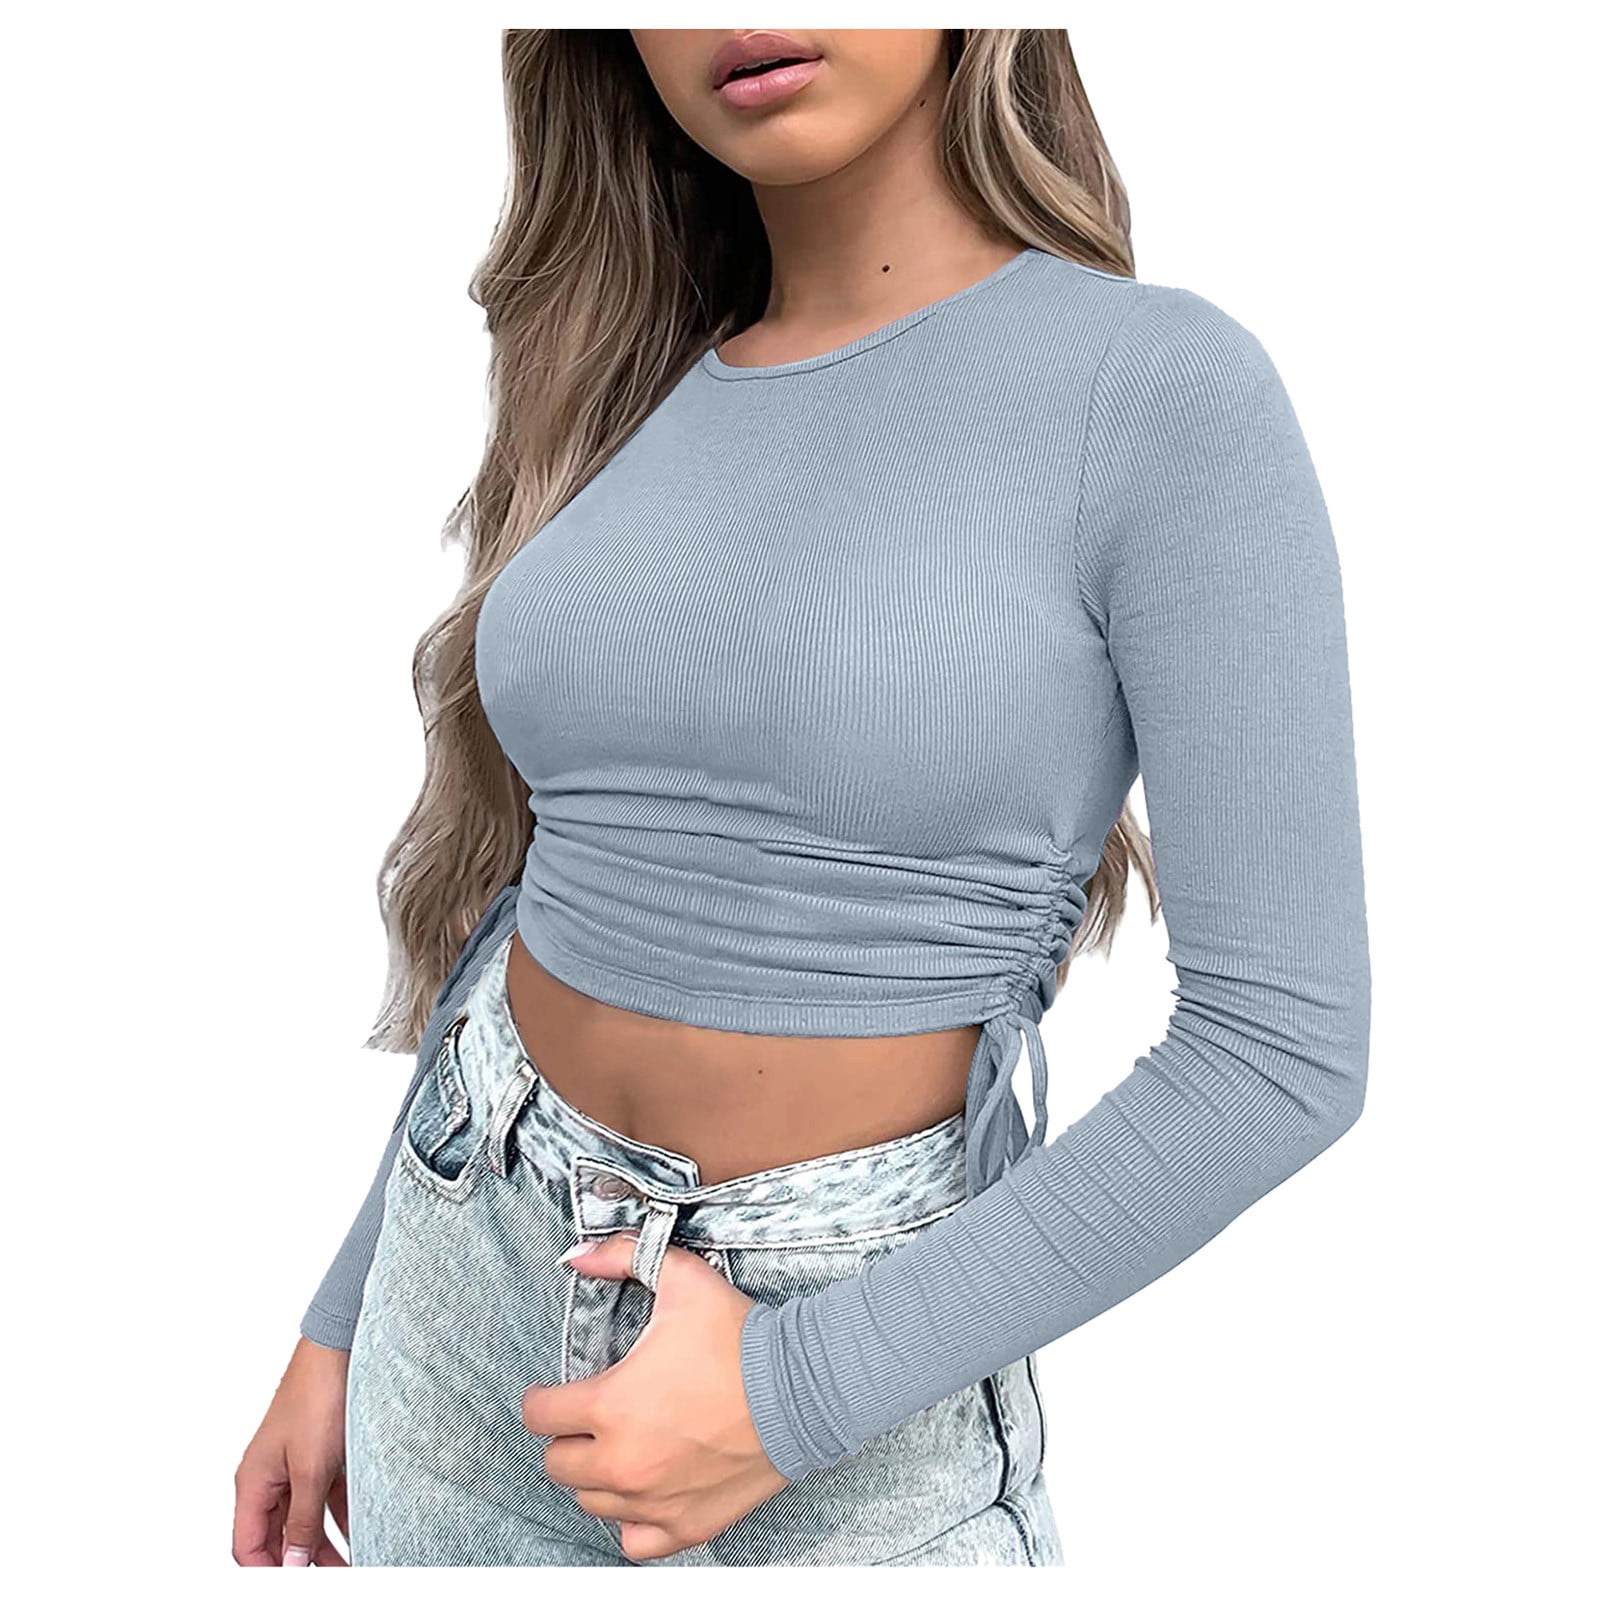 Women Summer Casual Sexy Sleeveless V Neck Long,5 Dollar,Under 1 Dollar  Items only,Shirts Under 5 Dollars,Cheap Summer Shirts for Women,5  Dollars,Clearance Ladies Tops Grey at  Women's Clothing store